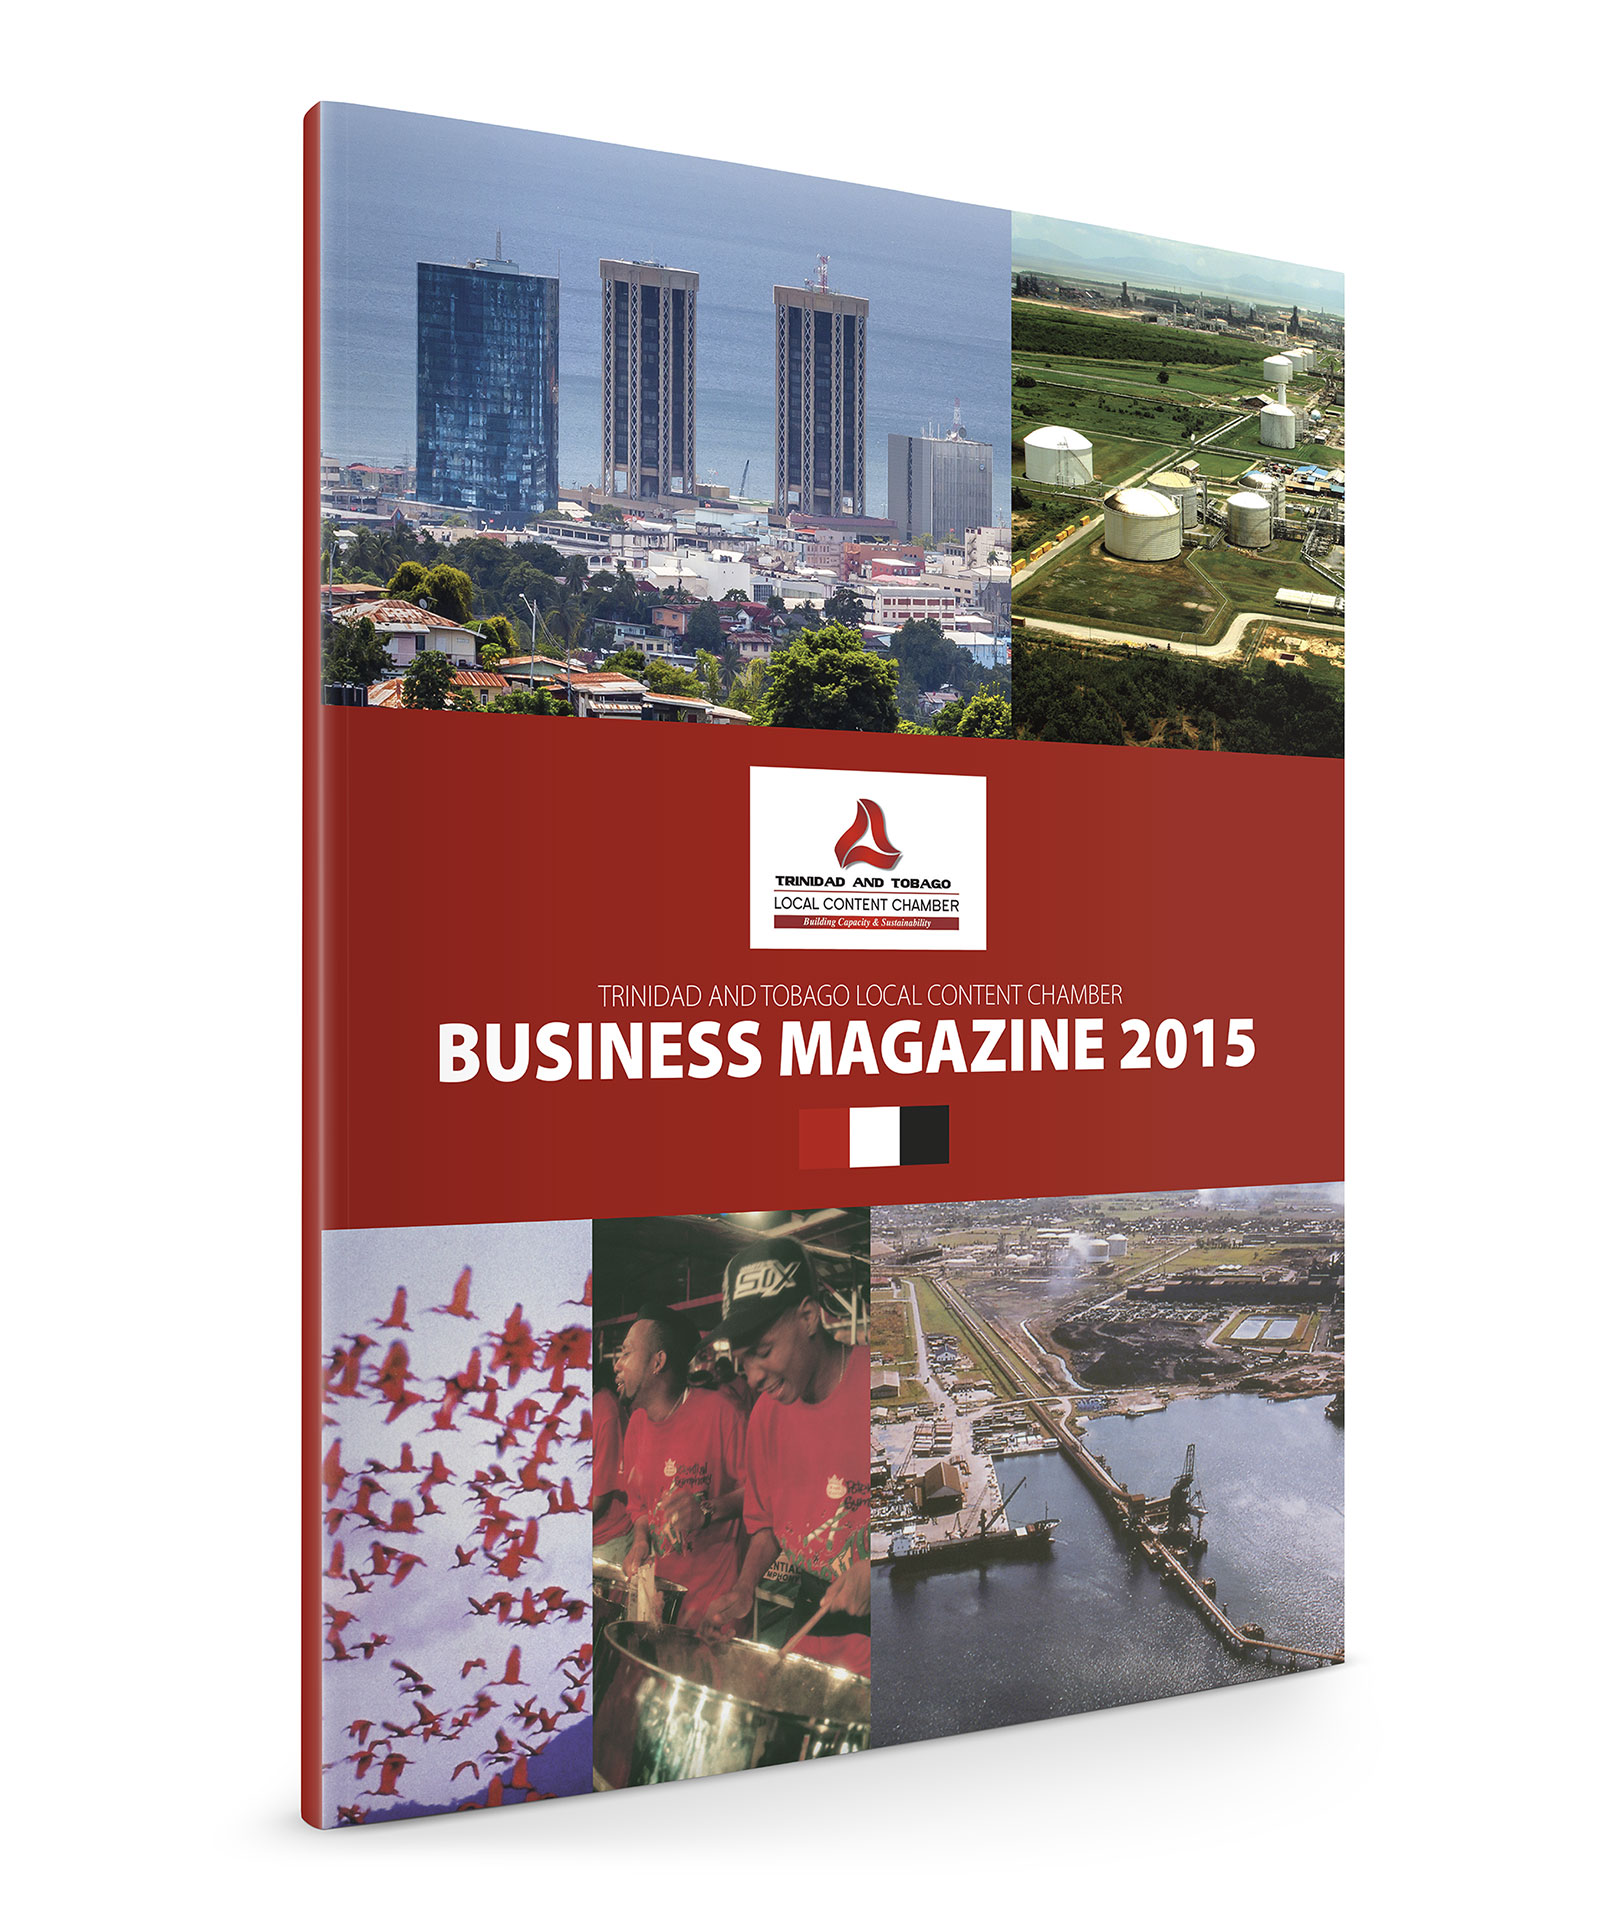 Trinidad and Tobago Local Content Chamber - Business Magazine 2015